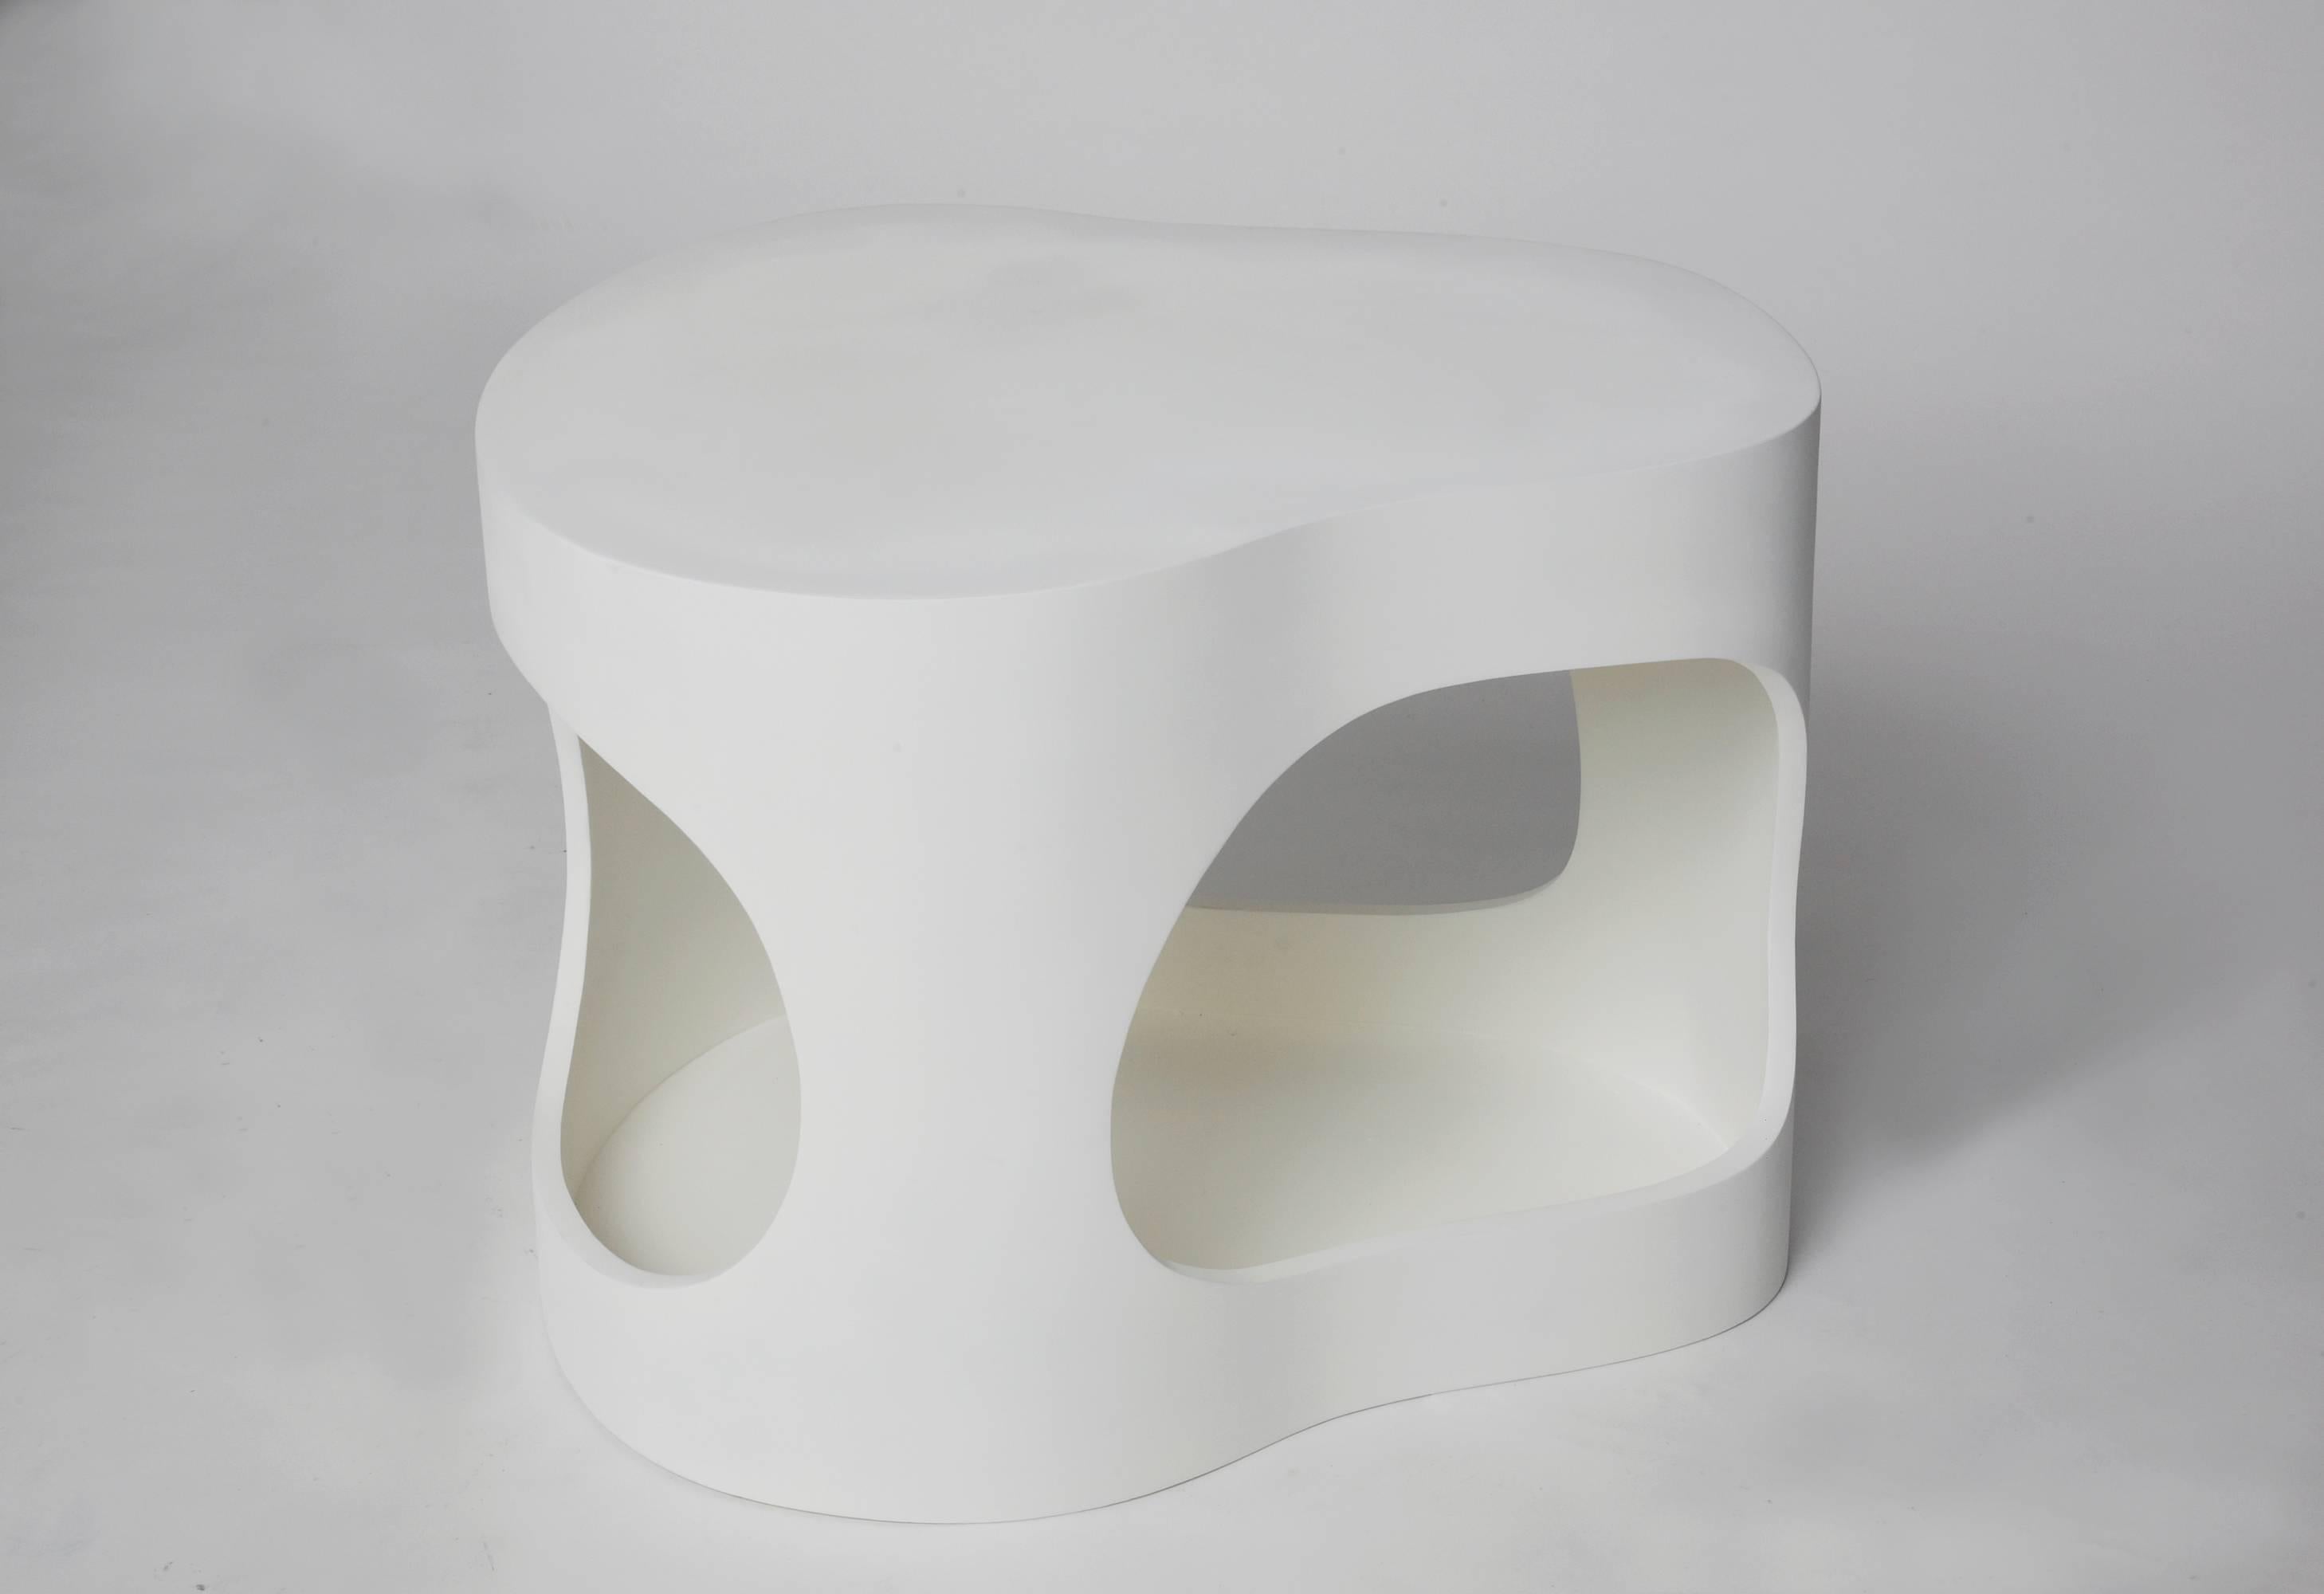 A pair of sculpted side tables shown here white on white but they can be commissioned in custom colors both for the inside and the outside. Jacques Jarrige is a contemporary artist living in Paris. With the juxtaposition of positive and negative